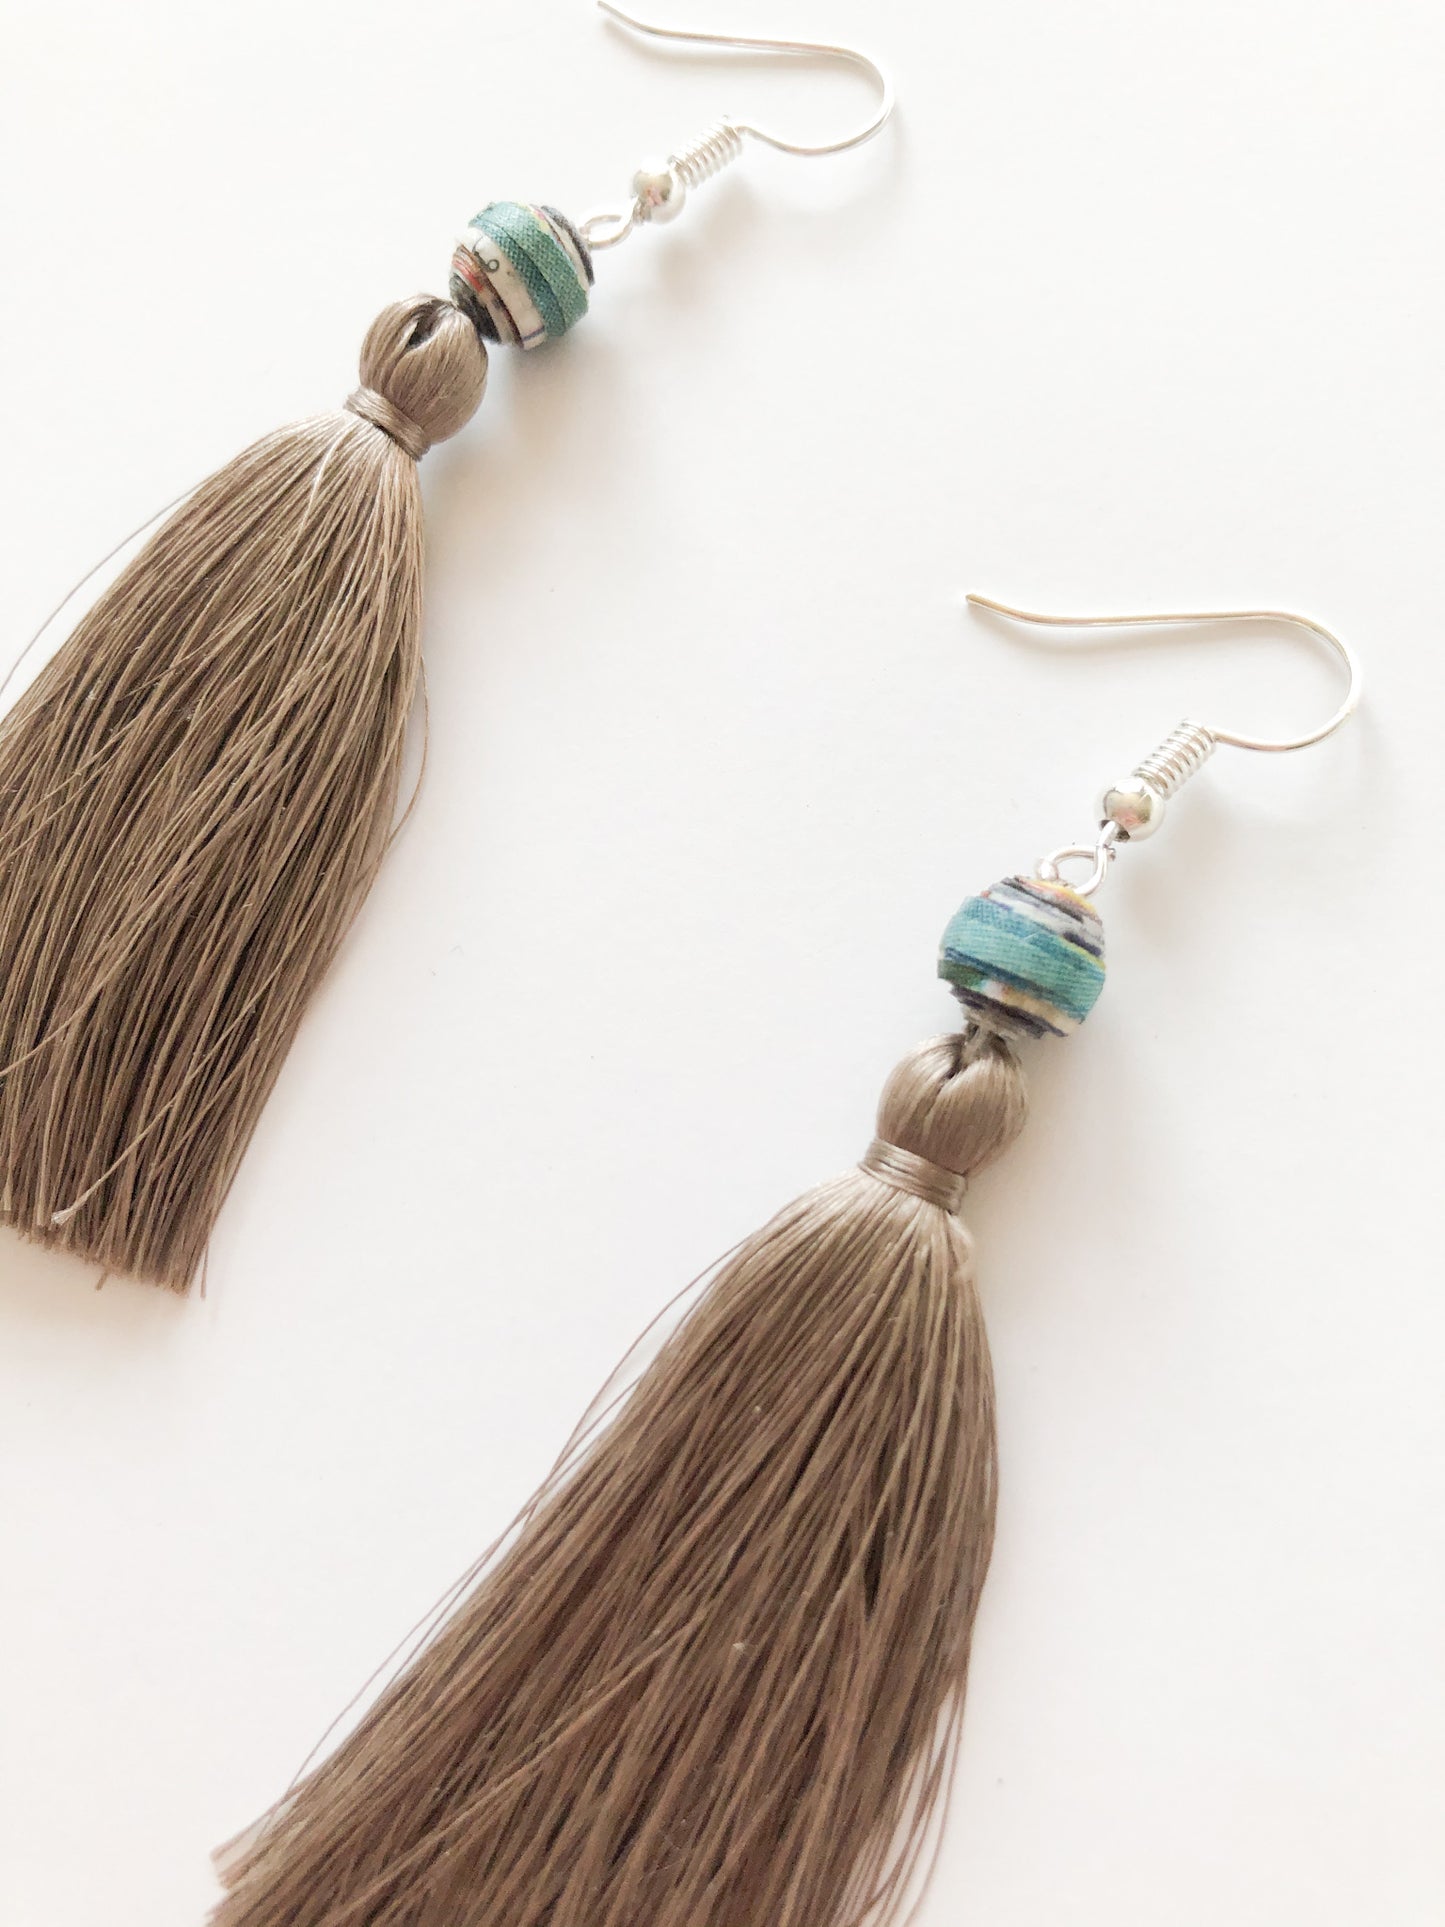 Handmade Recycled Paper & Silk Tassel Earrings Supporting Disabled Women in Laos